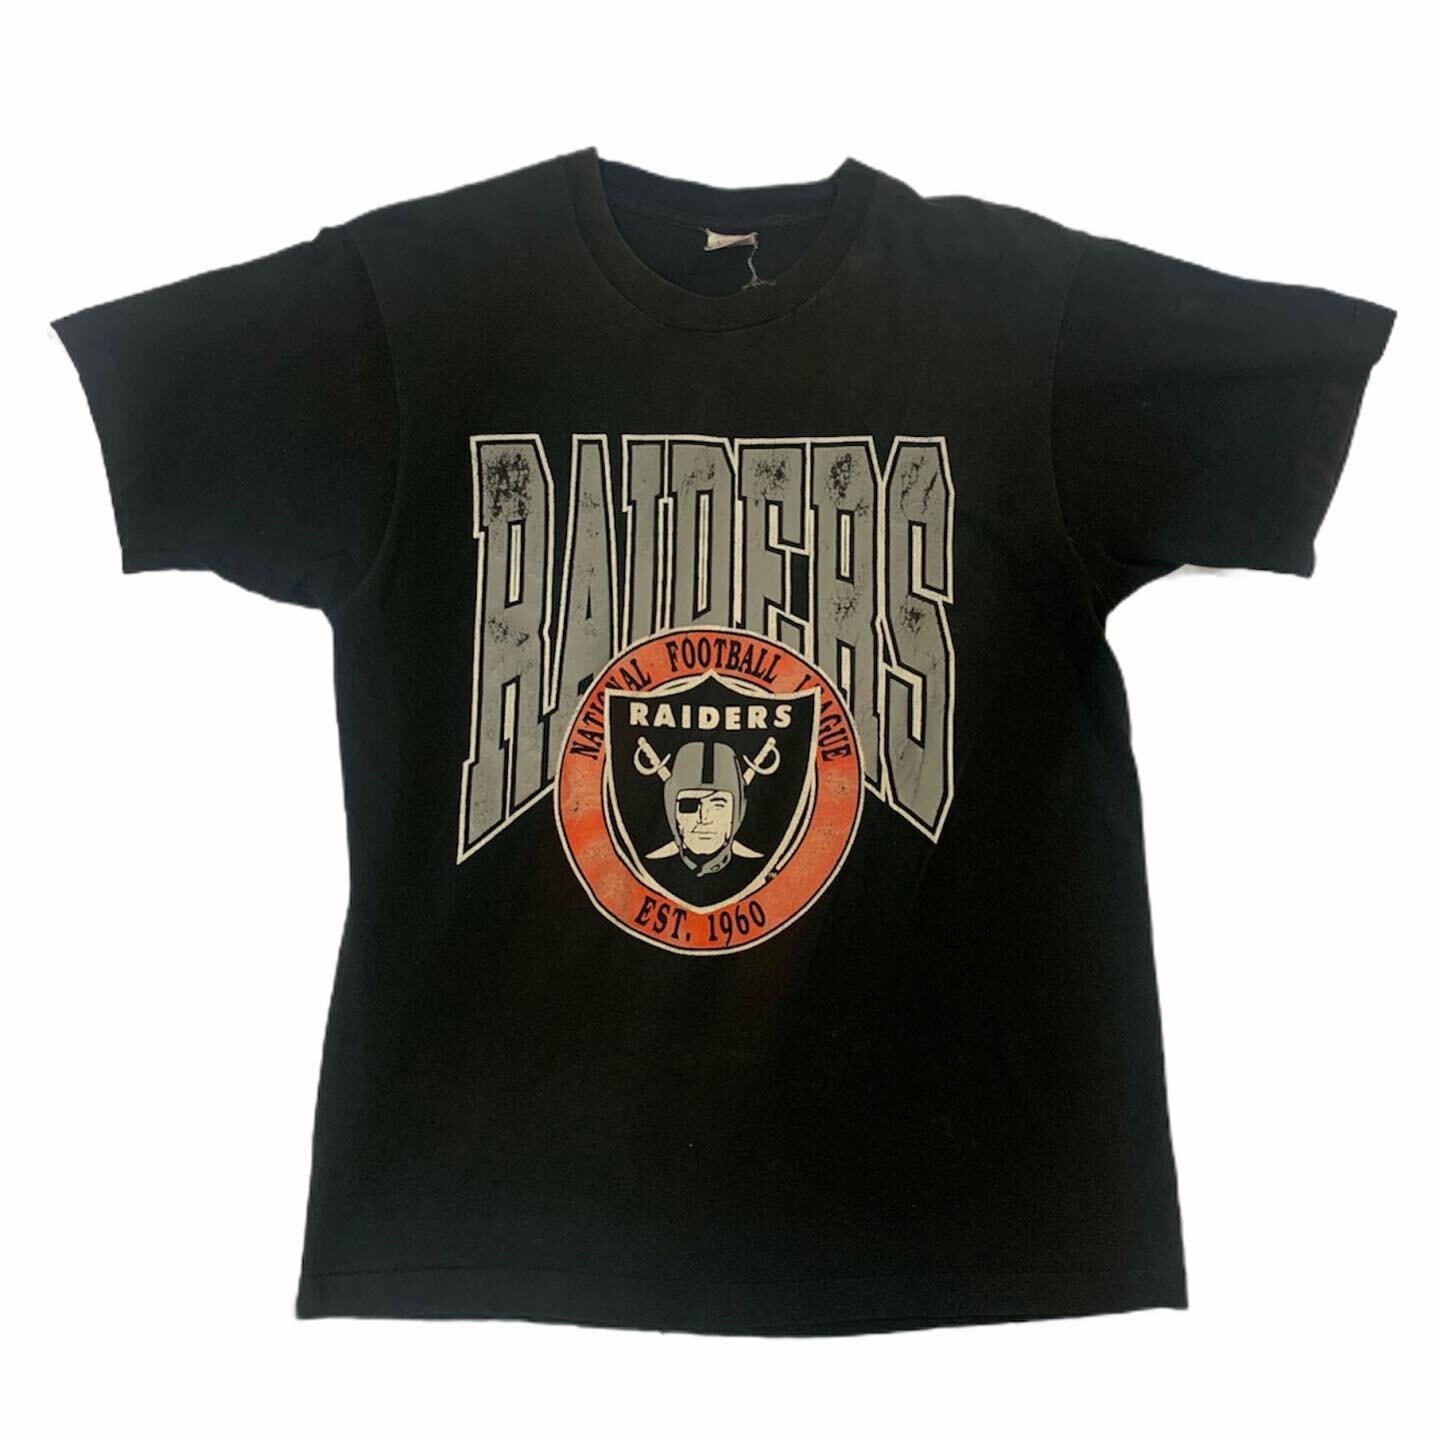 Vintage 80&rsquo;s Raiders Football T-Shirt

- made in USA 🇺🇸
- size large 
- fruit of the loom
- great vintage condition
-$79.99

#raiders #raidersnation #football #forsale #vintage #80s #exile